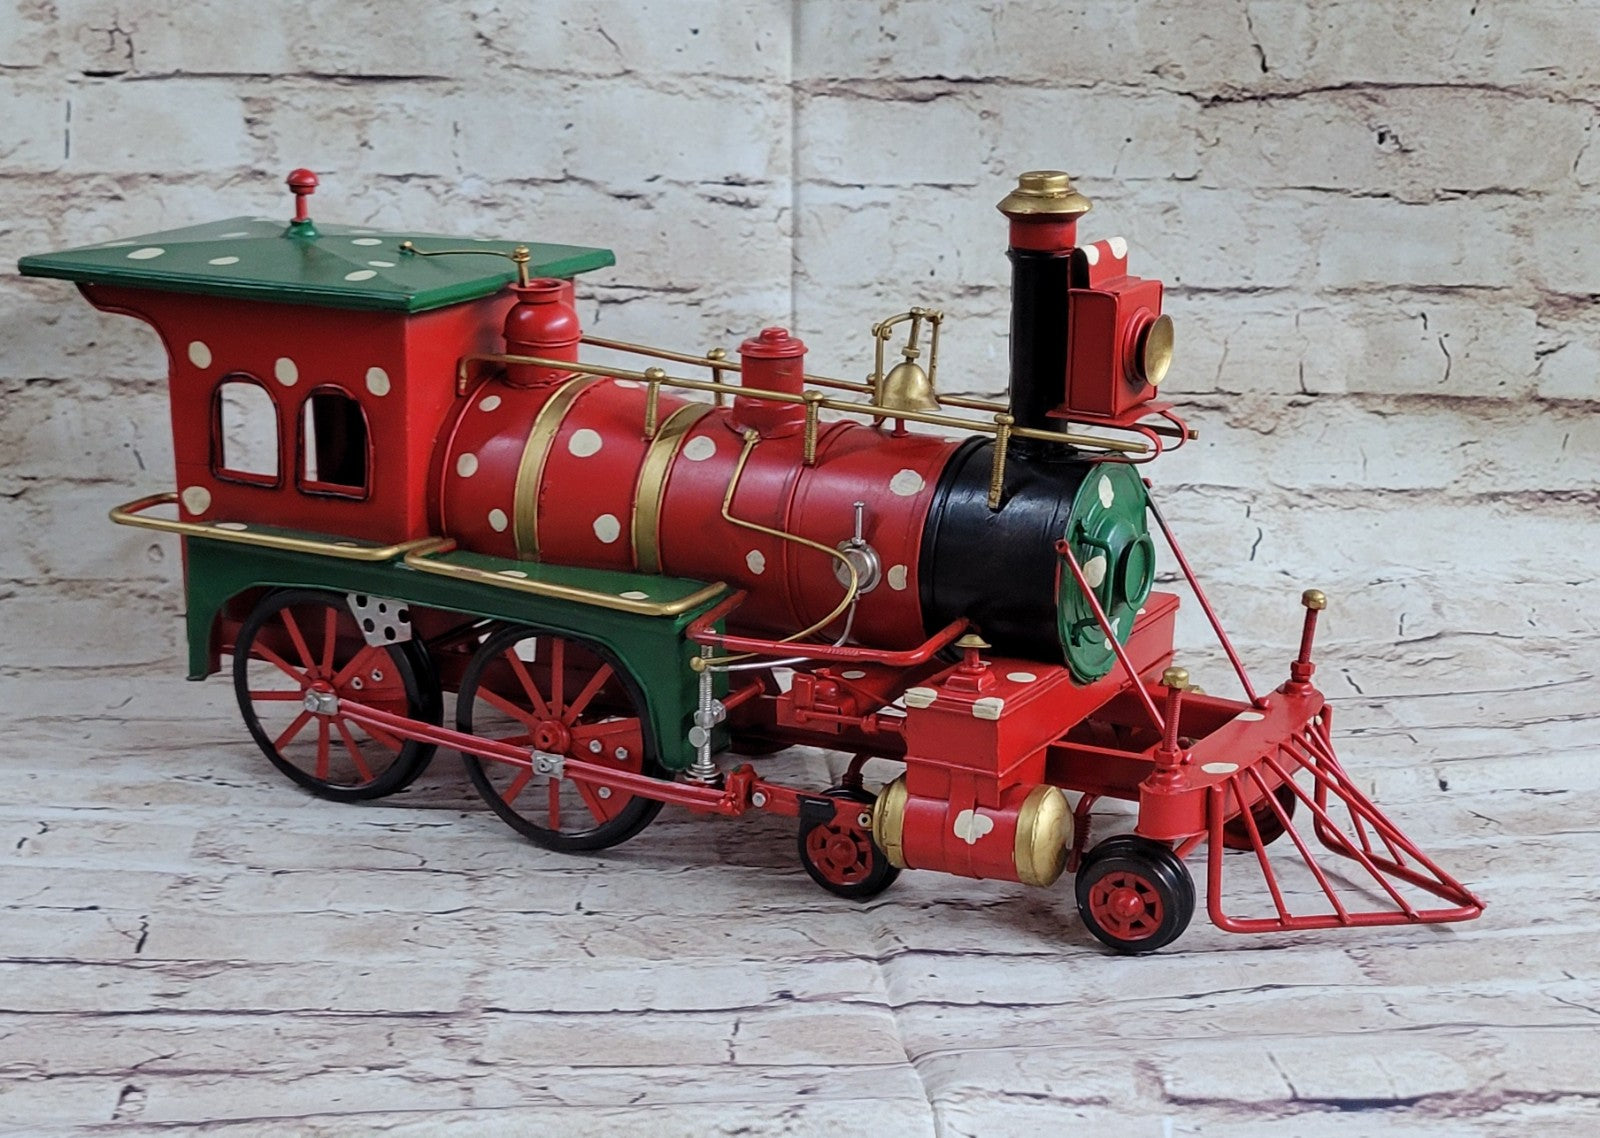 MODERN TOYS : WESTERN SPECIAL LOCOMOTIVE HAND MADE CLASSIC ARTWORK FIGURINE FOR COLLECTOR